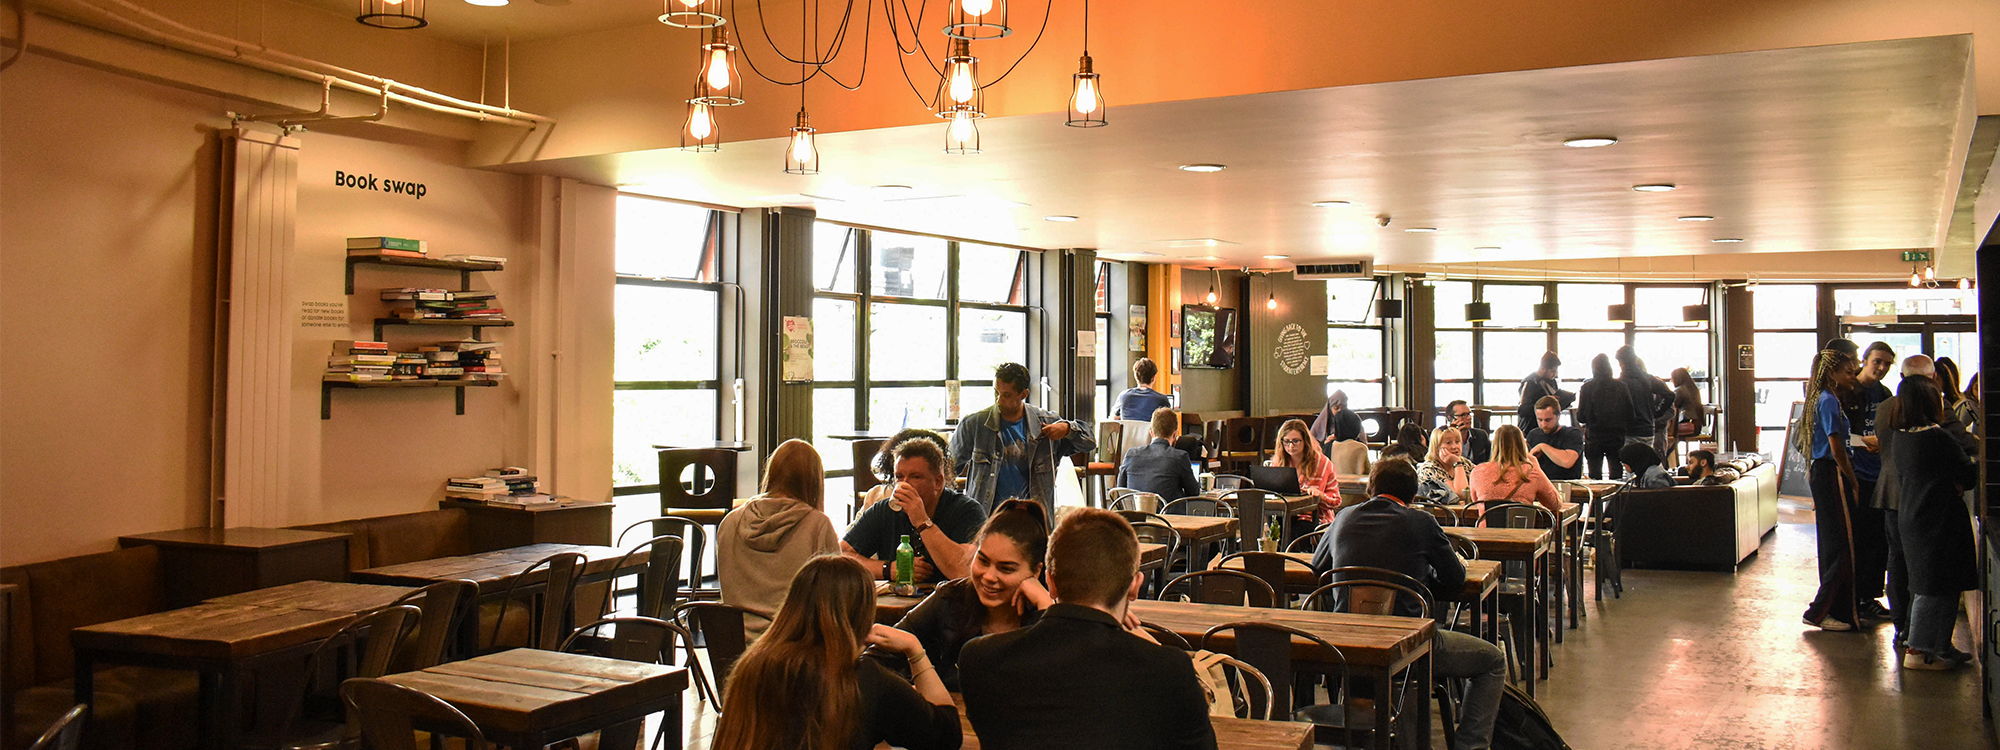 Relax in our on-campus café with a great range of food and drink from toasted paninis, sandwiches and sushi to our ethical Fairtrade coffee, refreshing smoothies and delicious treats